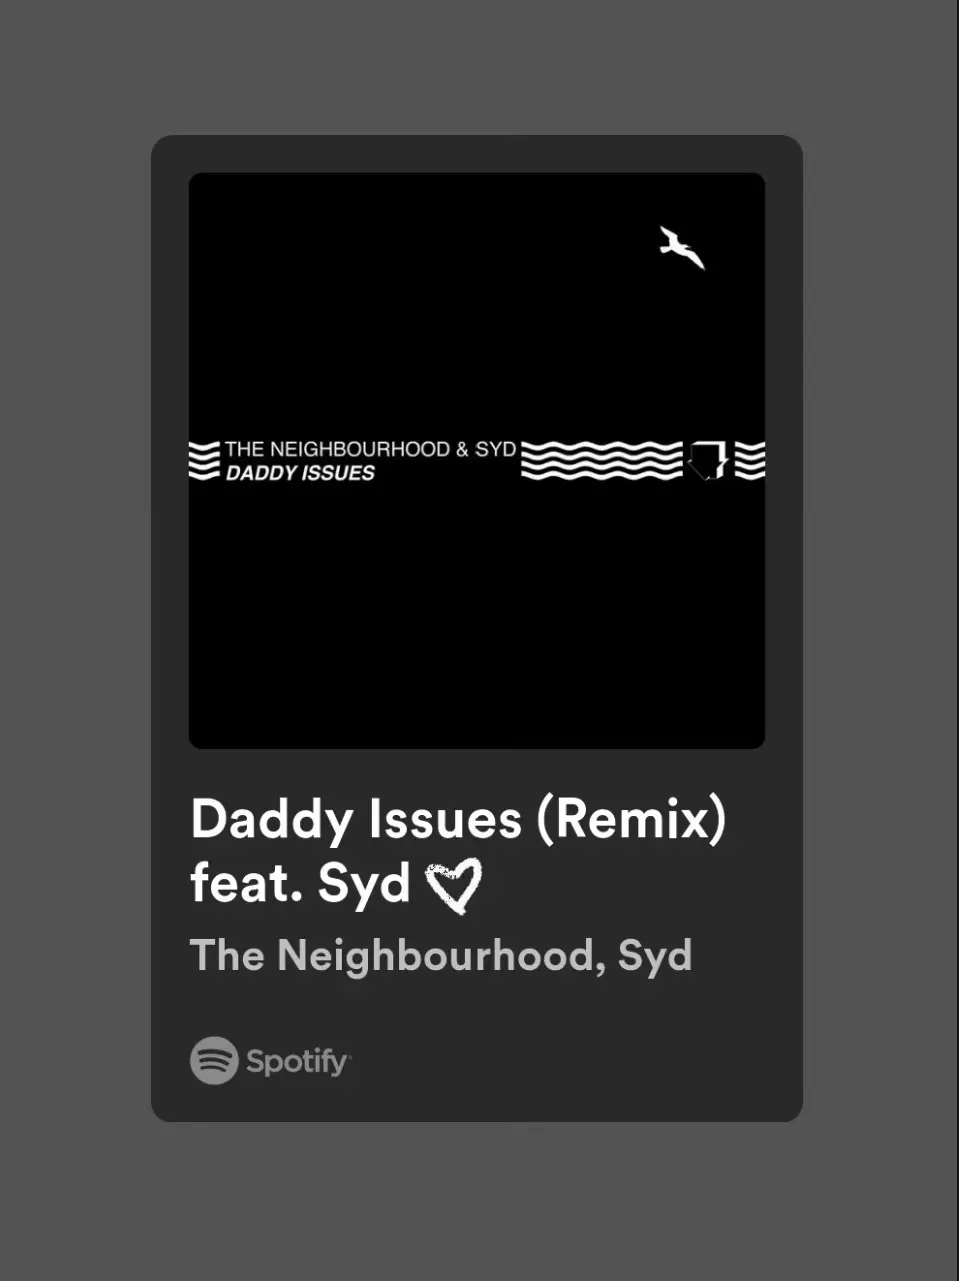  A Spotify playlist of Daddy Issues.